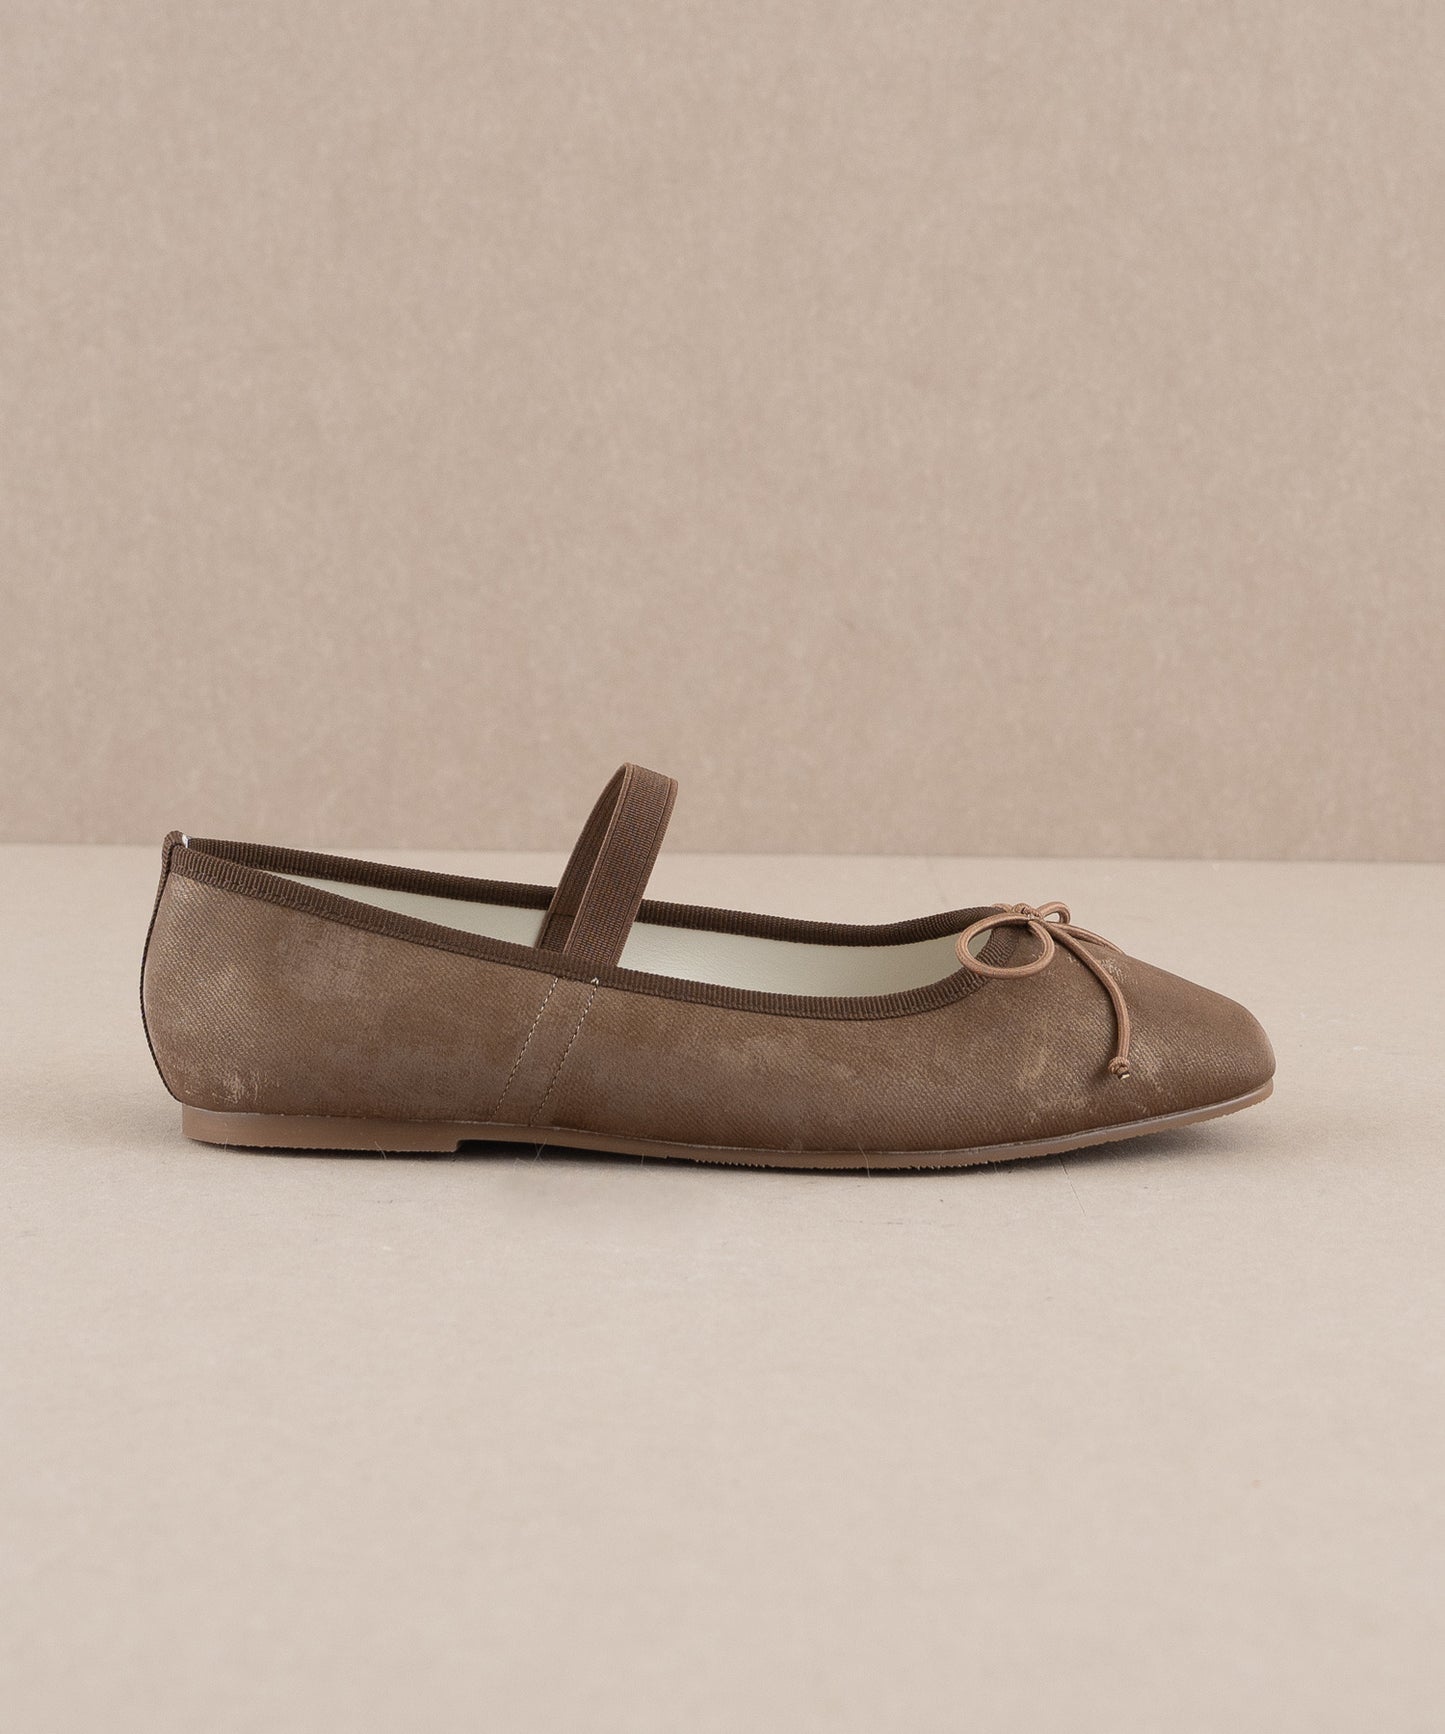 The London Ballet Pointe Flats (2 Options)